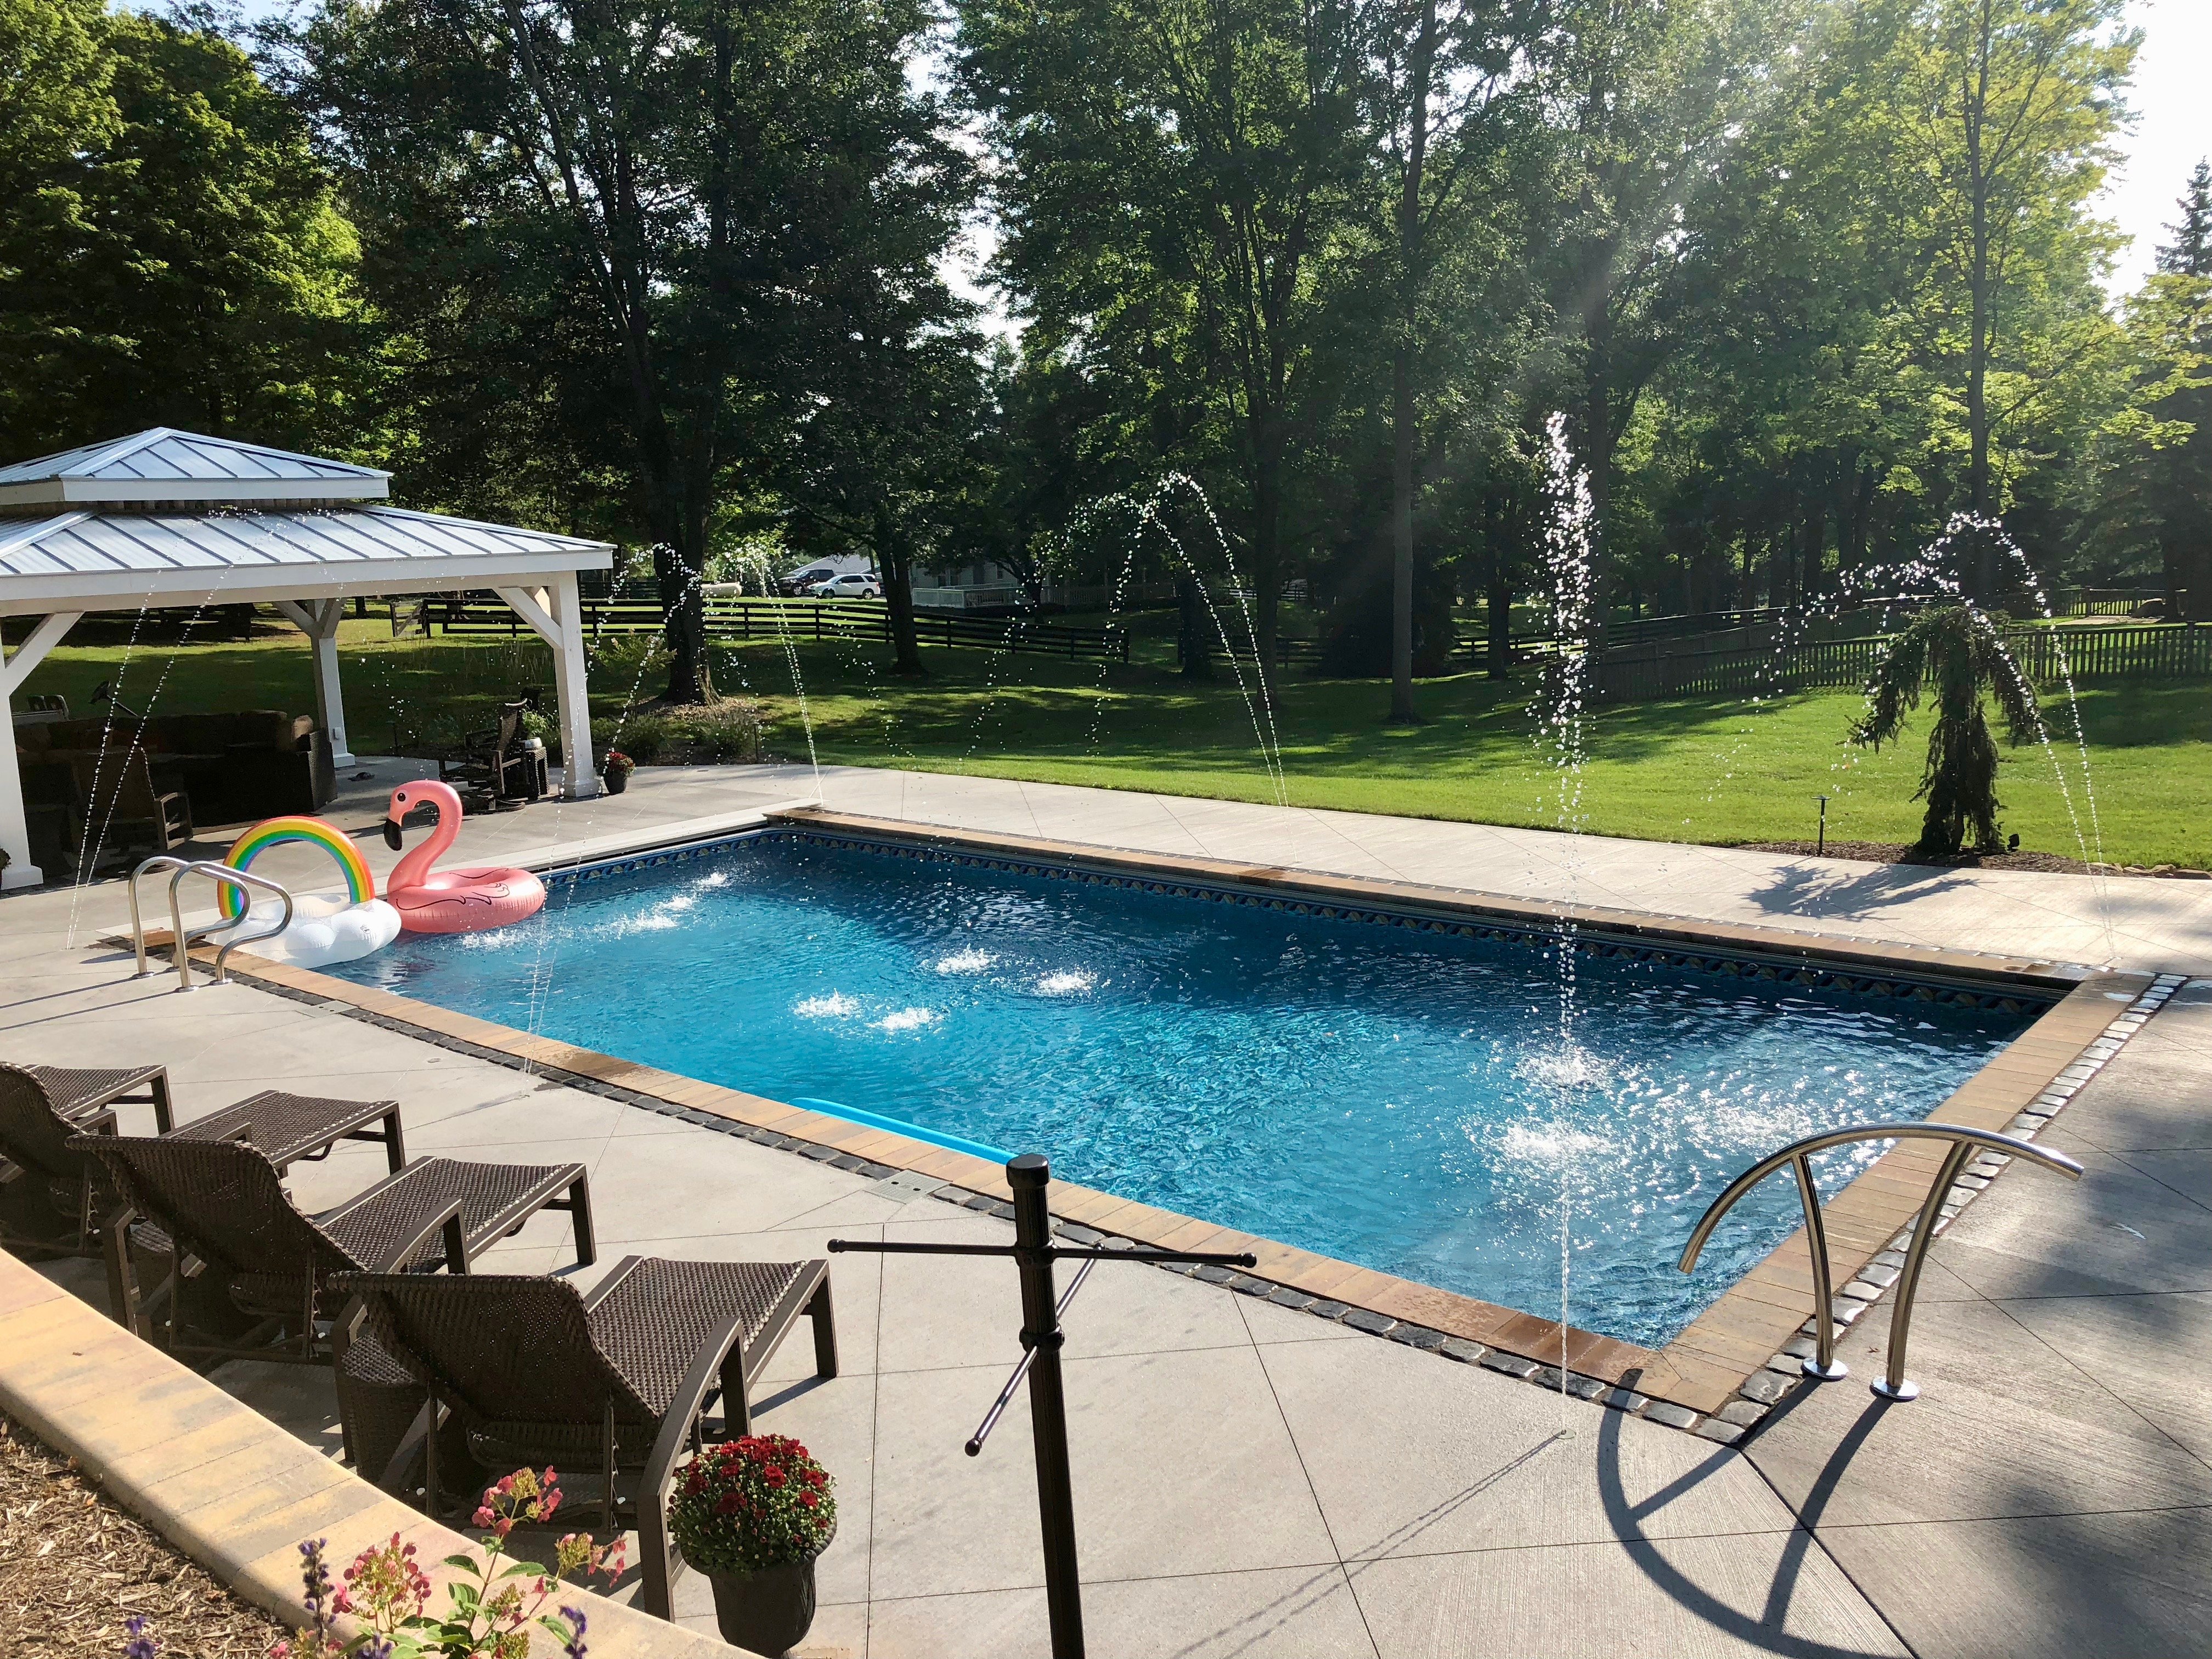 How to Save Money on an Inground Swimming Pool Vinyl upgrades